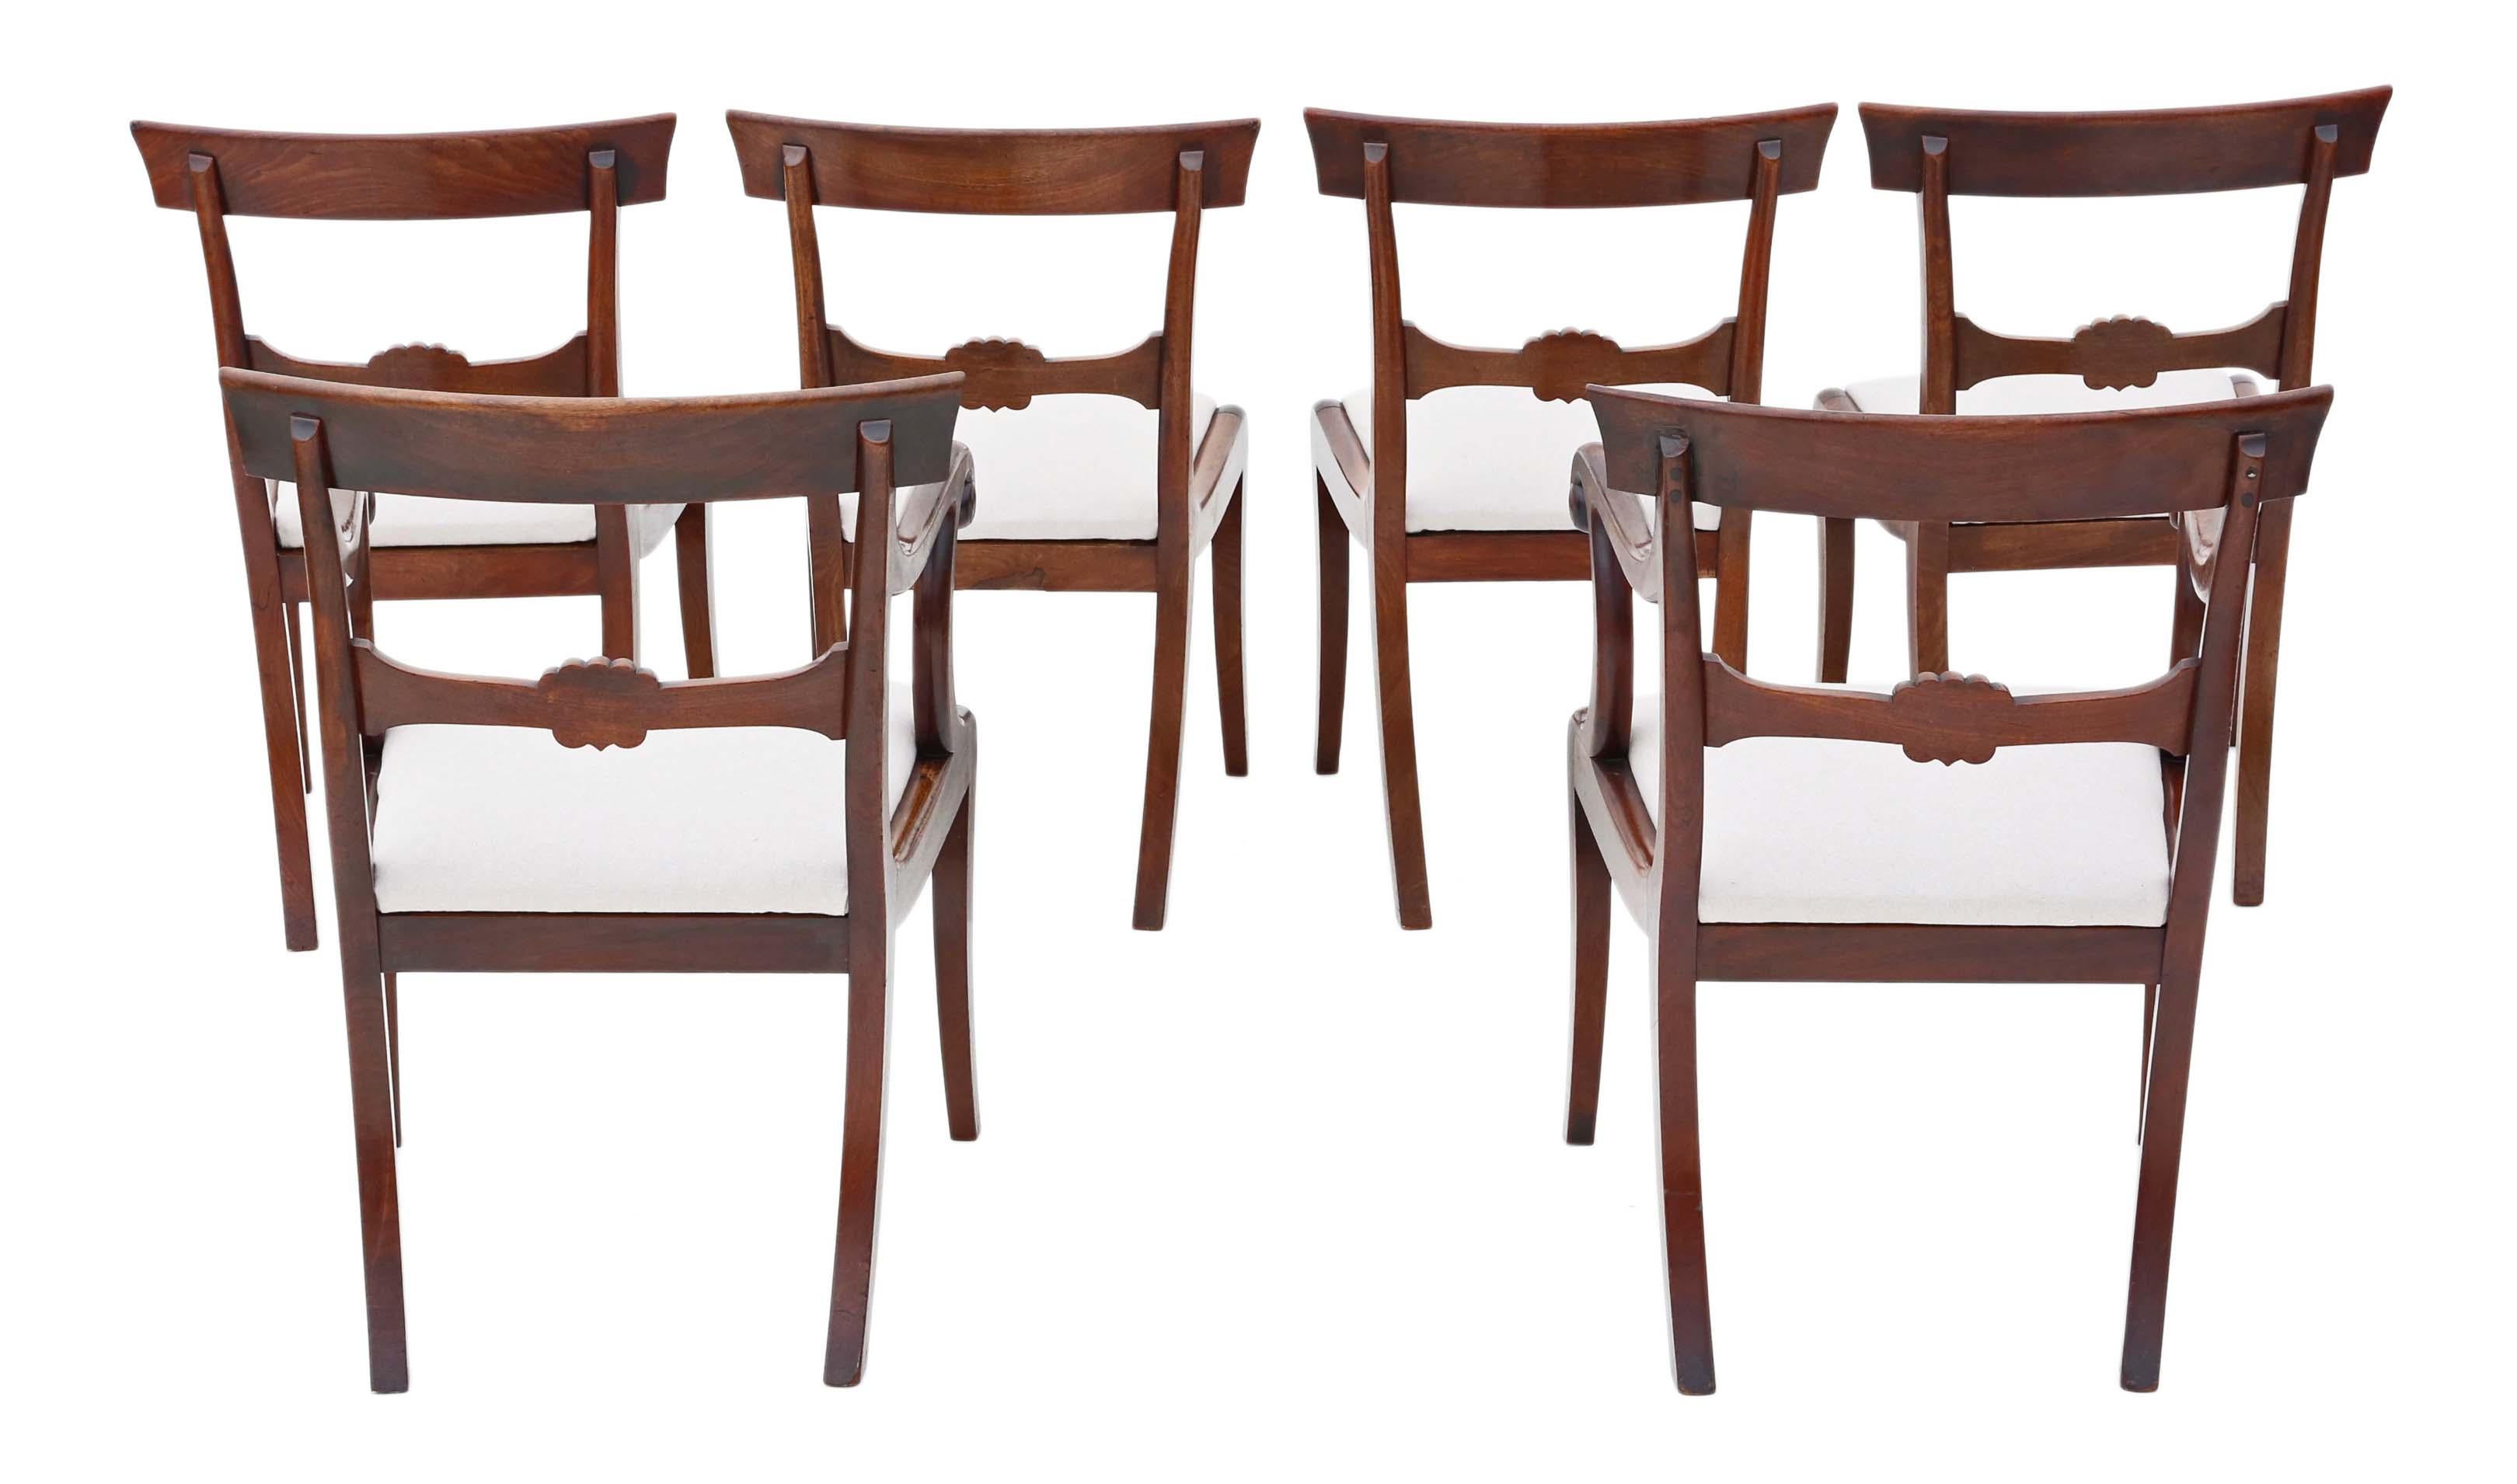 Antique fine quality set of 6 (4 +2) Regency Cuban mahogany dining chairs 19th Century C1825.

A rare find and a bit special.

No loose joints.
New professional upholstery.

Overall maximum dimensions:

Chair 50cmW x 52cmD x 81cmH (43cmH seat when